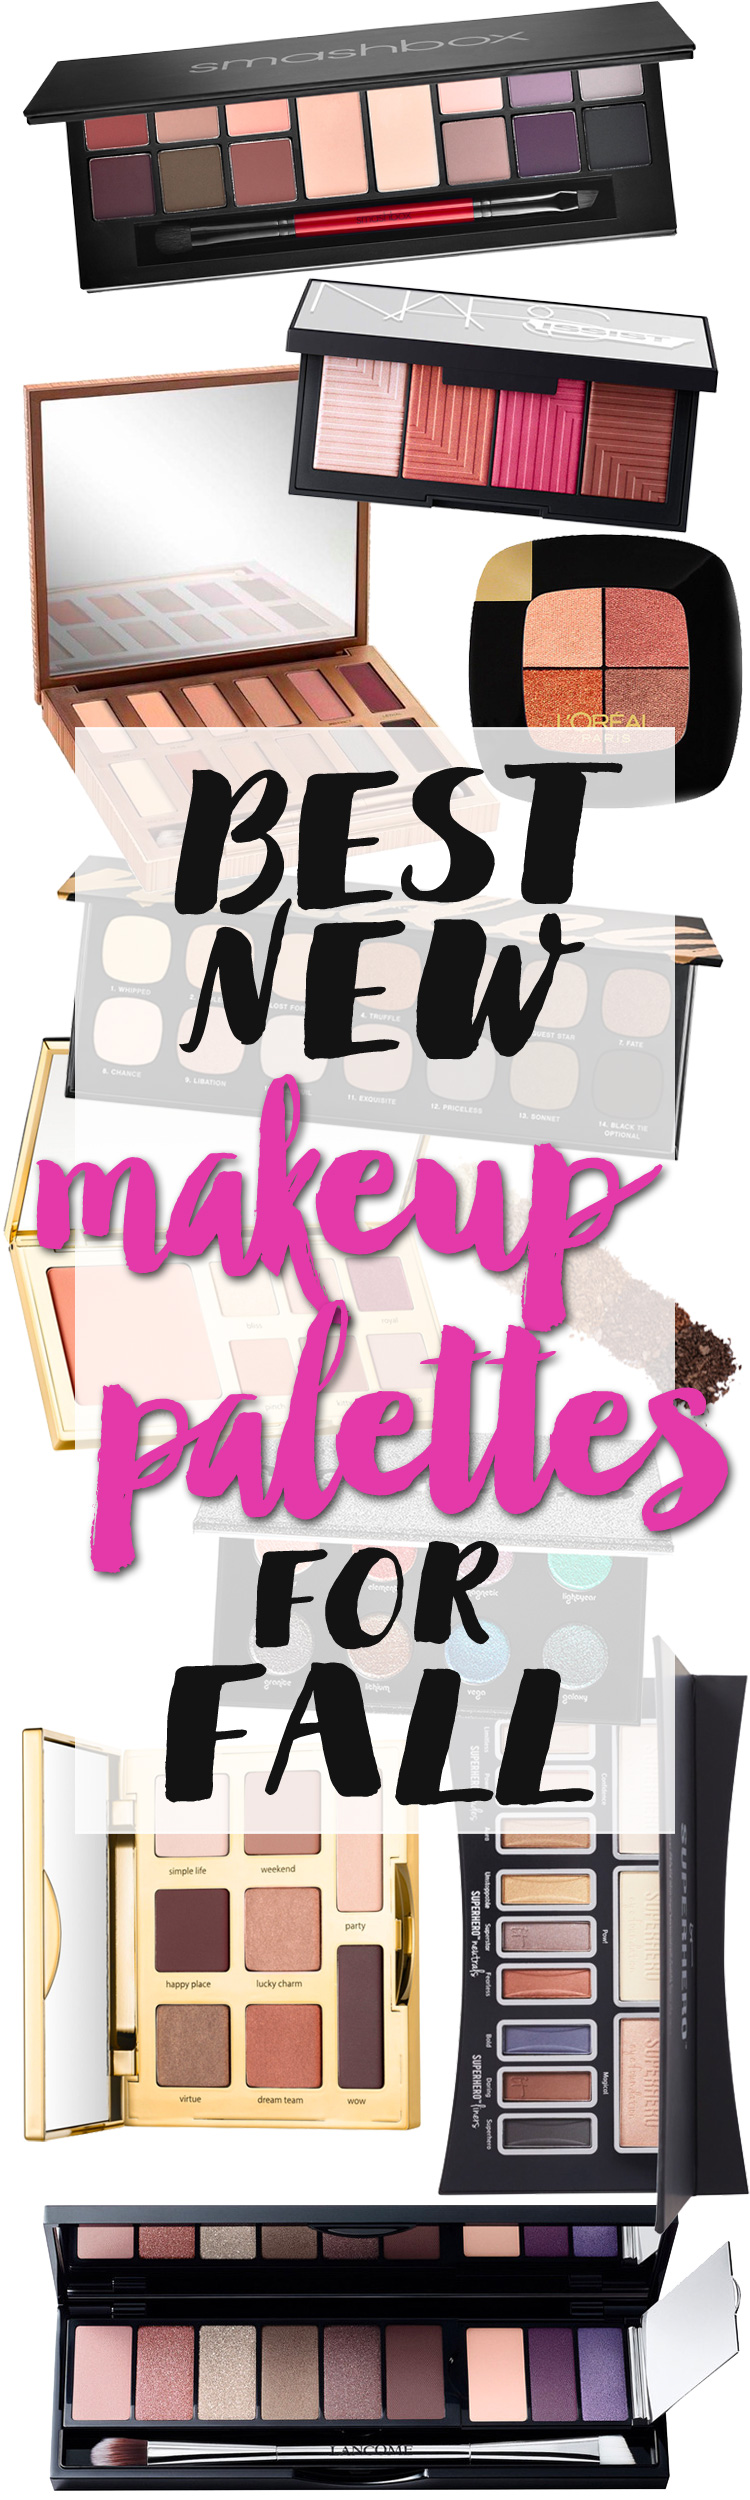 Top 10 New Makeup Palettes for Fall